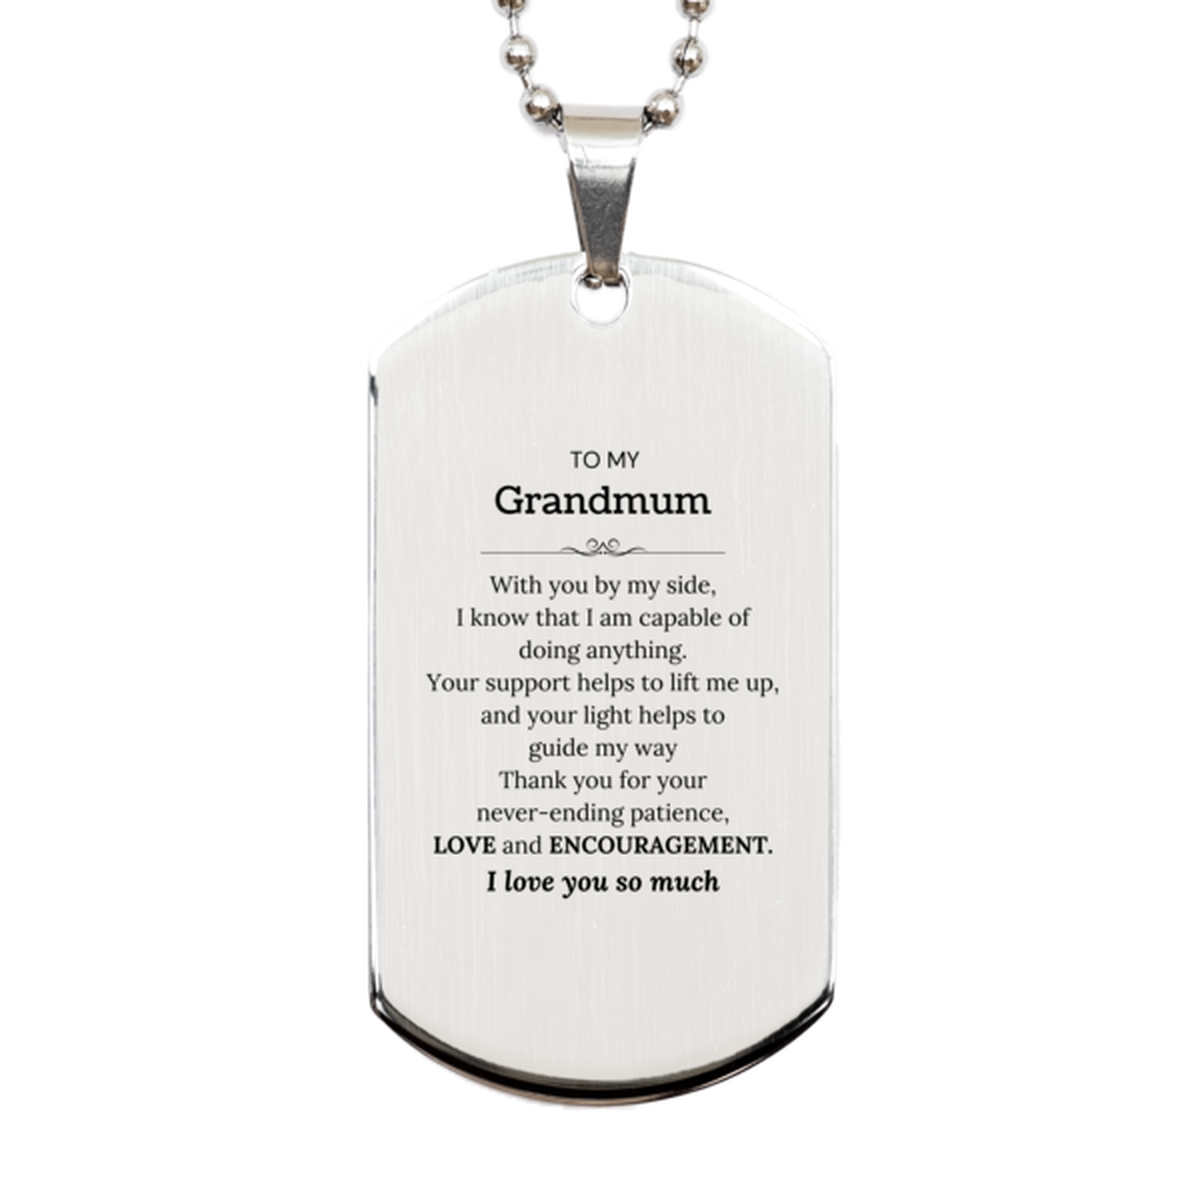 Appreciation Grandmum Silver Dog Tag Gifts, To My Grandmum Birthday Christmas Wedding Keepsake Gifts for Grandmum With you by my side, I know that I am capable of doing anything. I love you so much